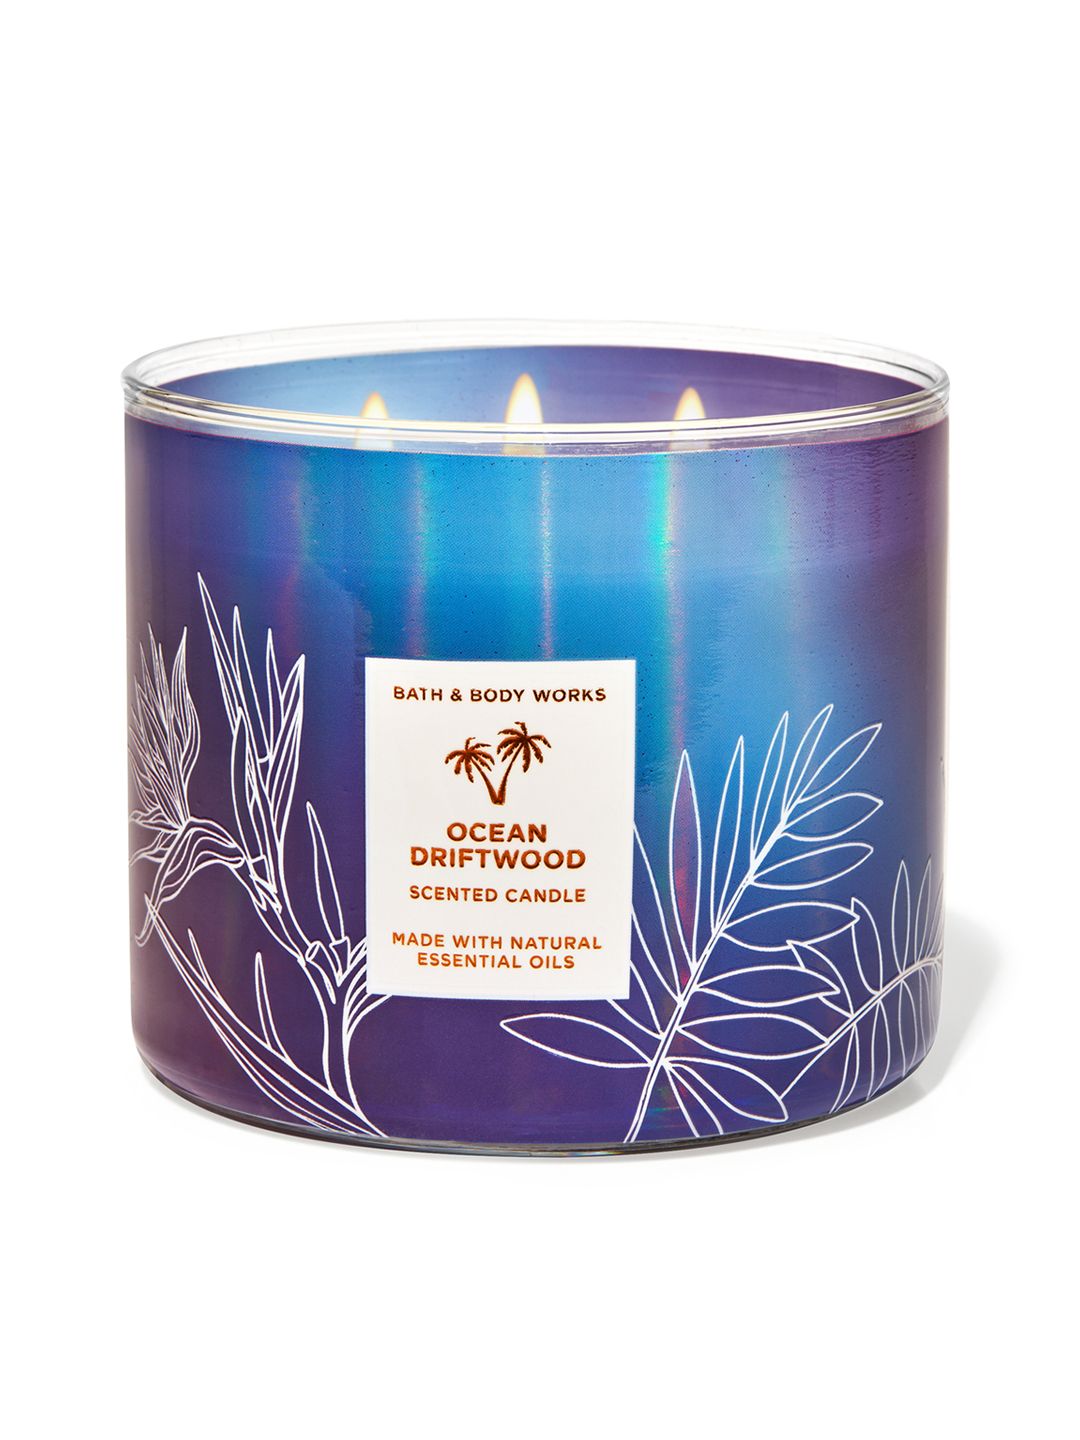 Bath & Body Works Ocean Driftwood 3-Wick Scented Candle - 411 g Price in India